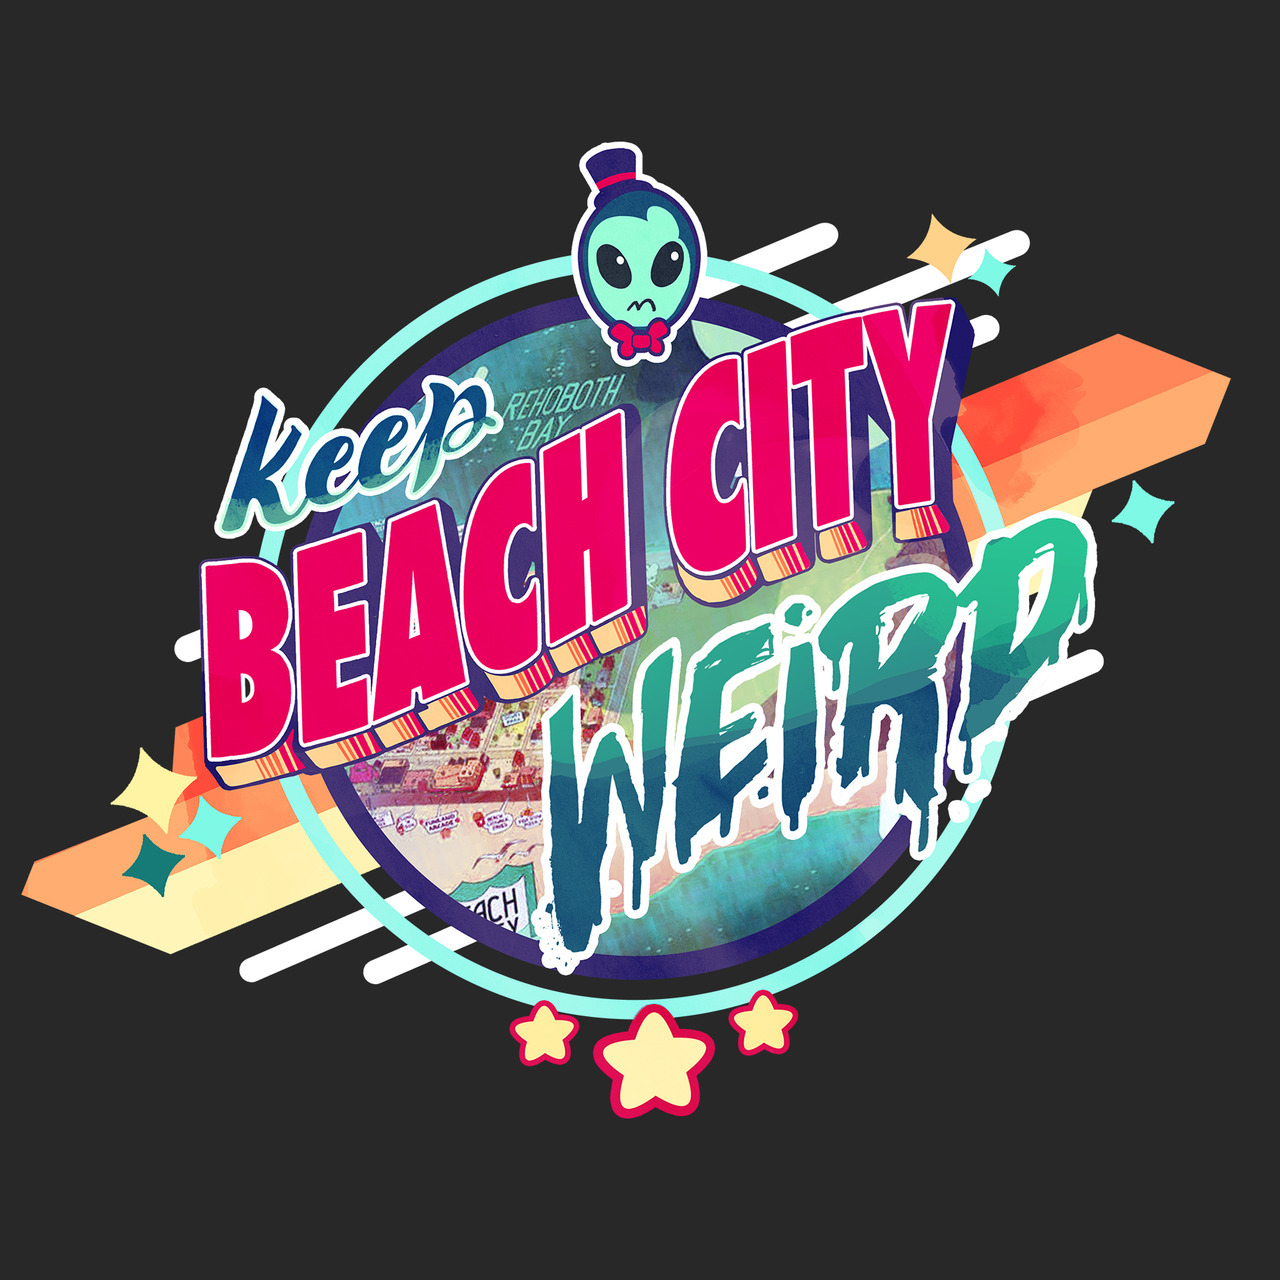 Wonderful, how the best parts of Beach City are the weirdest. My entry in the Steven Universe tshirt contest! Stay tuned for updates, and don’t forget to vote on the 27th!